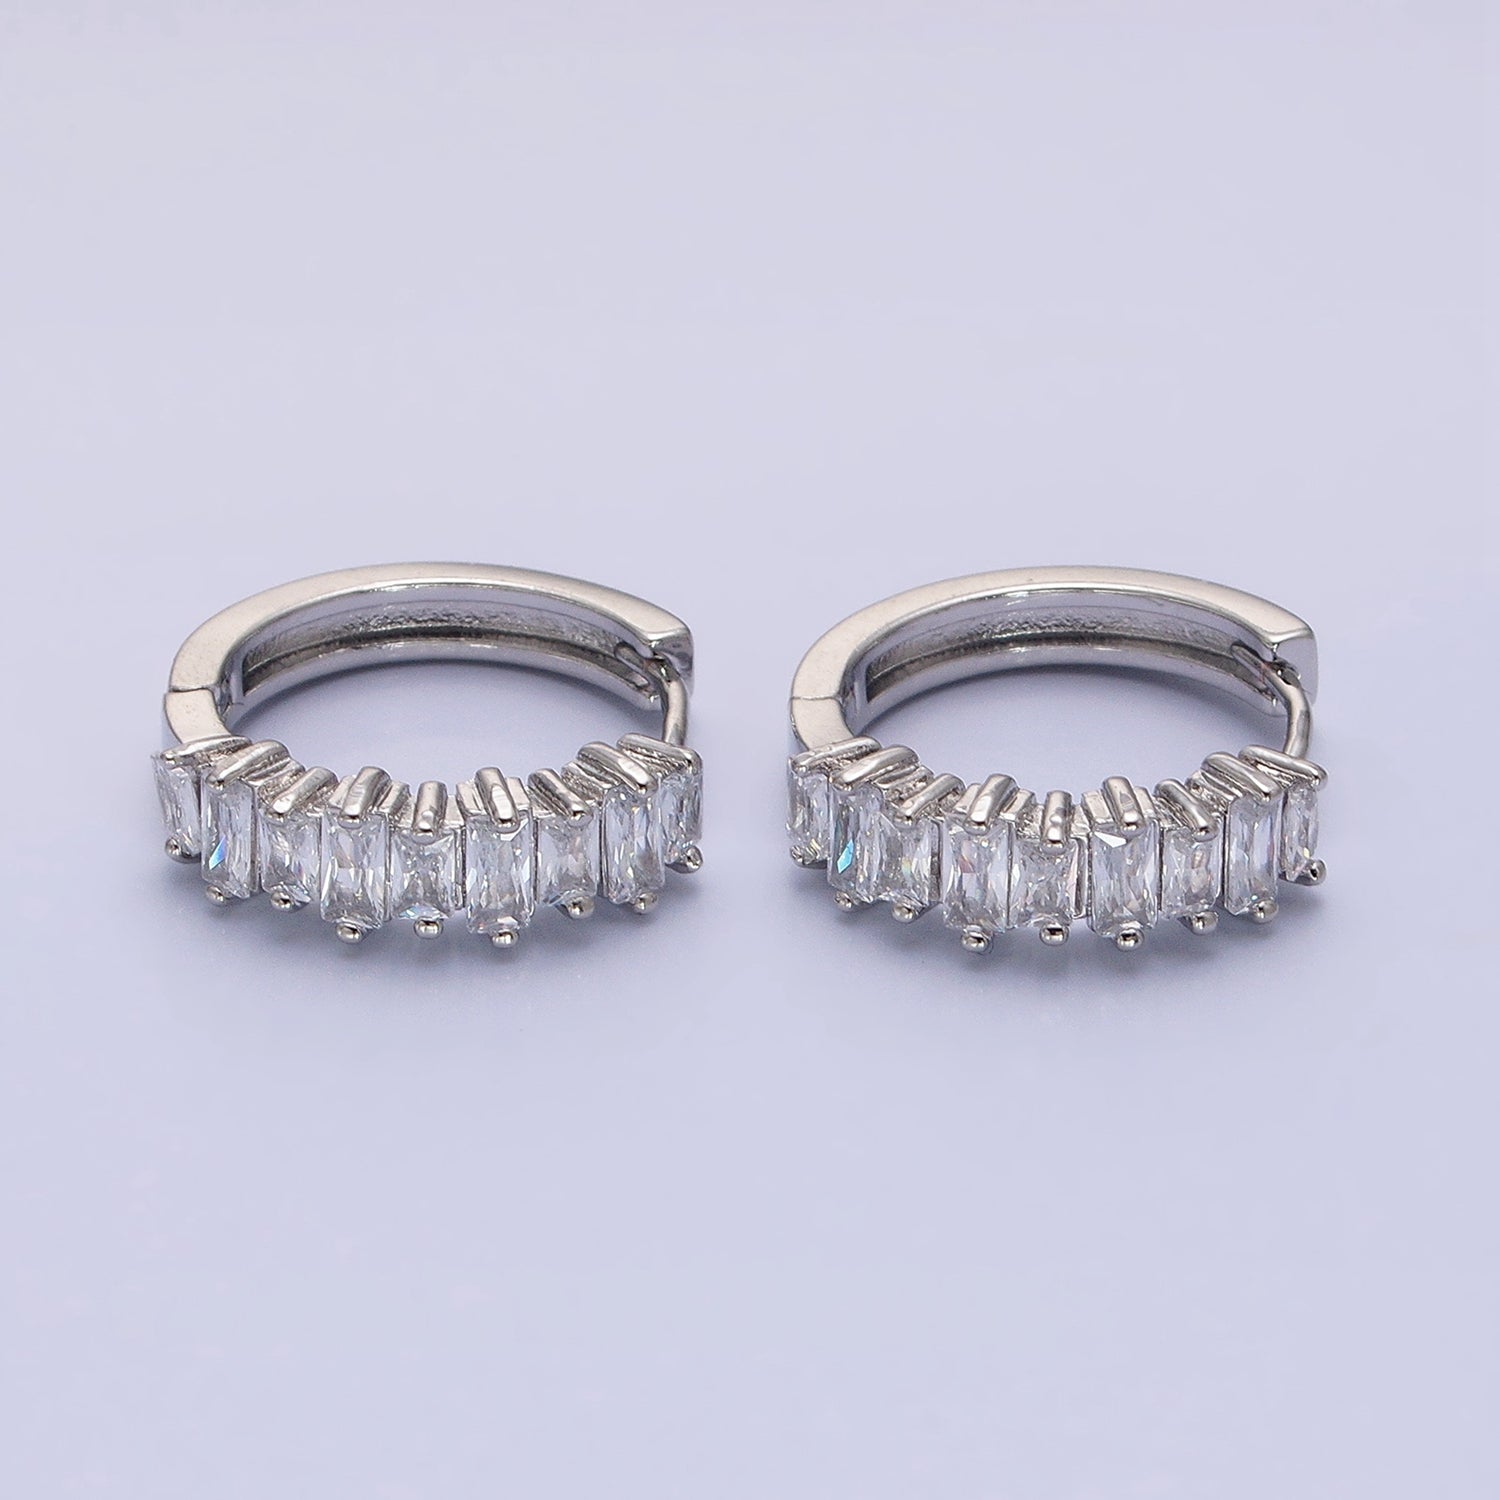 16K Gold Filled Clear Baguette CZ Lined 19mm Hoop Earrings | AB1459 AB1460 - DLUXCA